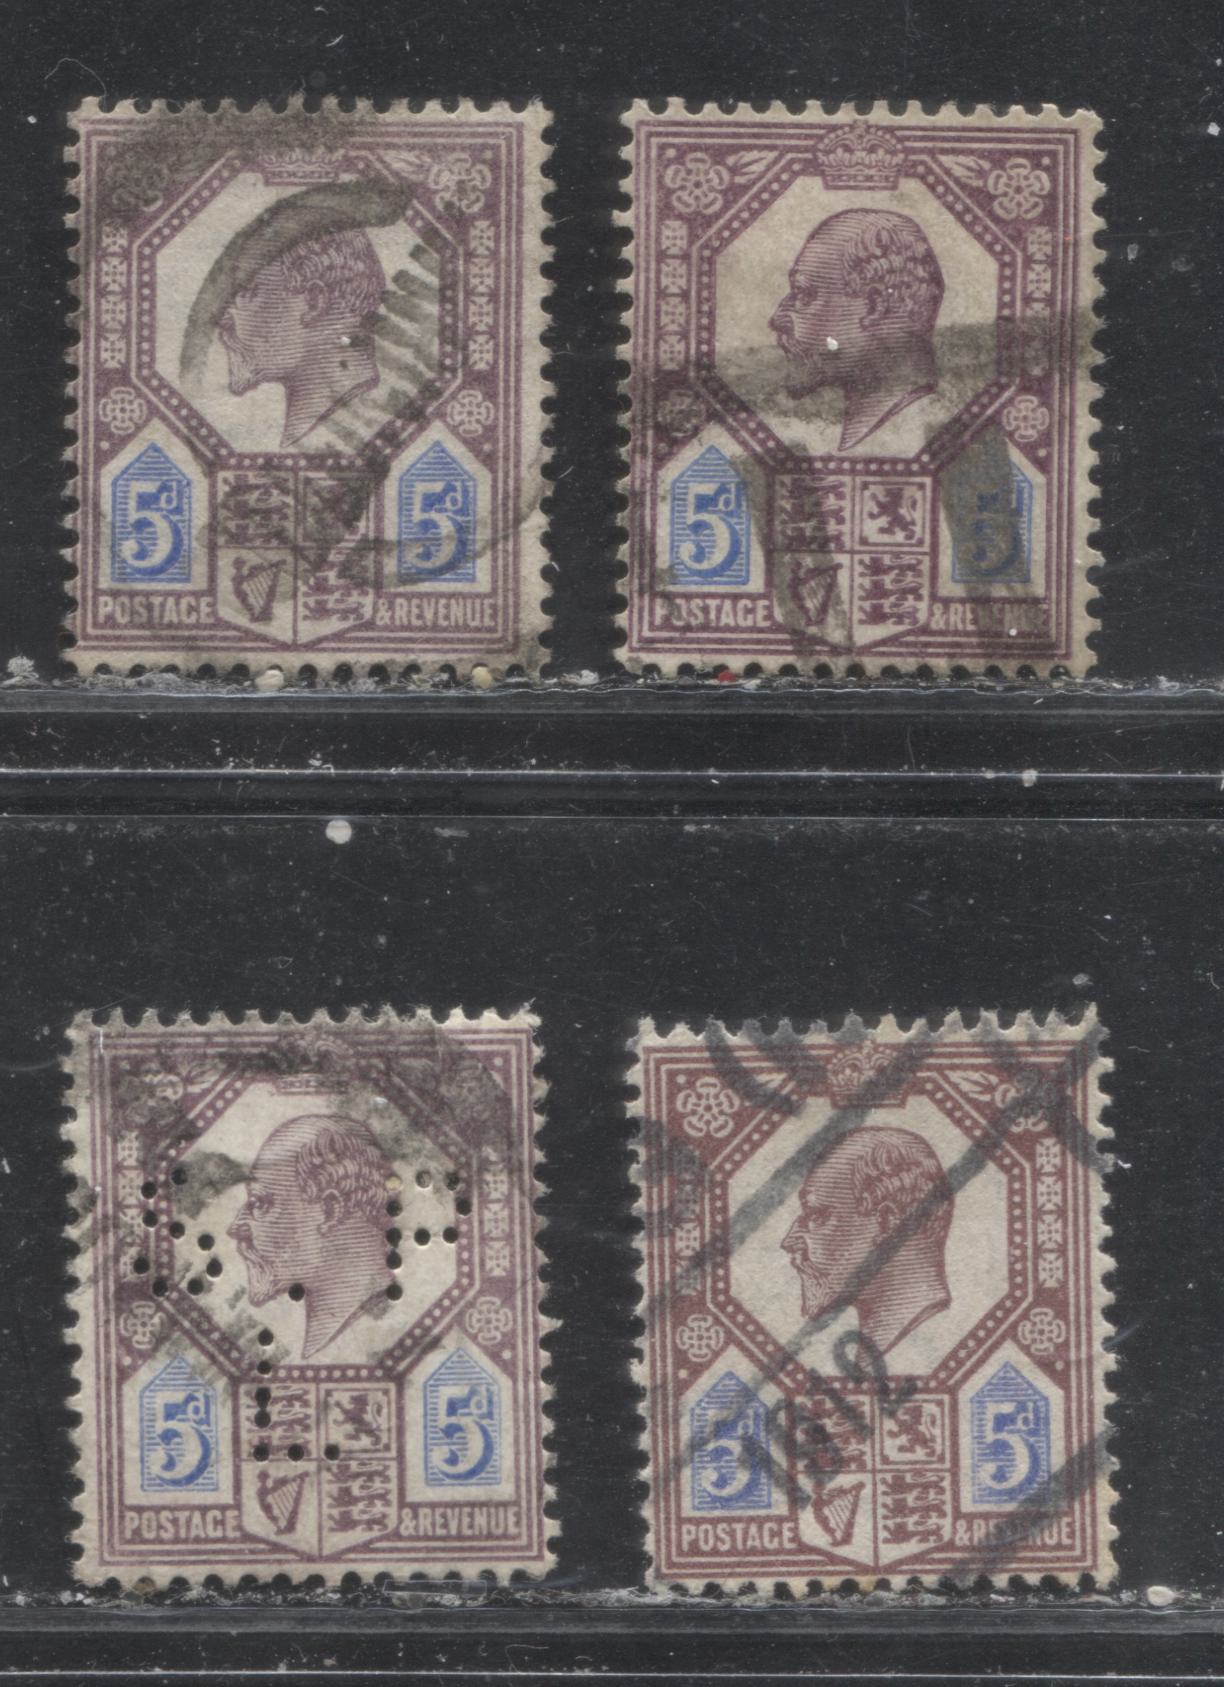 Lot 227 Great Brittain SG#242, 242a, 244, 294 5d Dull Purple & Ultramarine King Edward VII, 1902-1910 De La Rue Keyplate Issue, 4 VG & Fine Used Singles, Ordinary & Chalk Surfaced Papers, Including 4 Different Paper/Shade Combinations